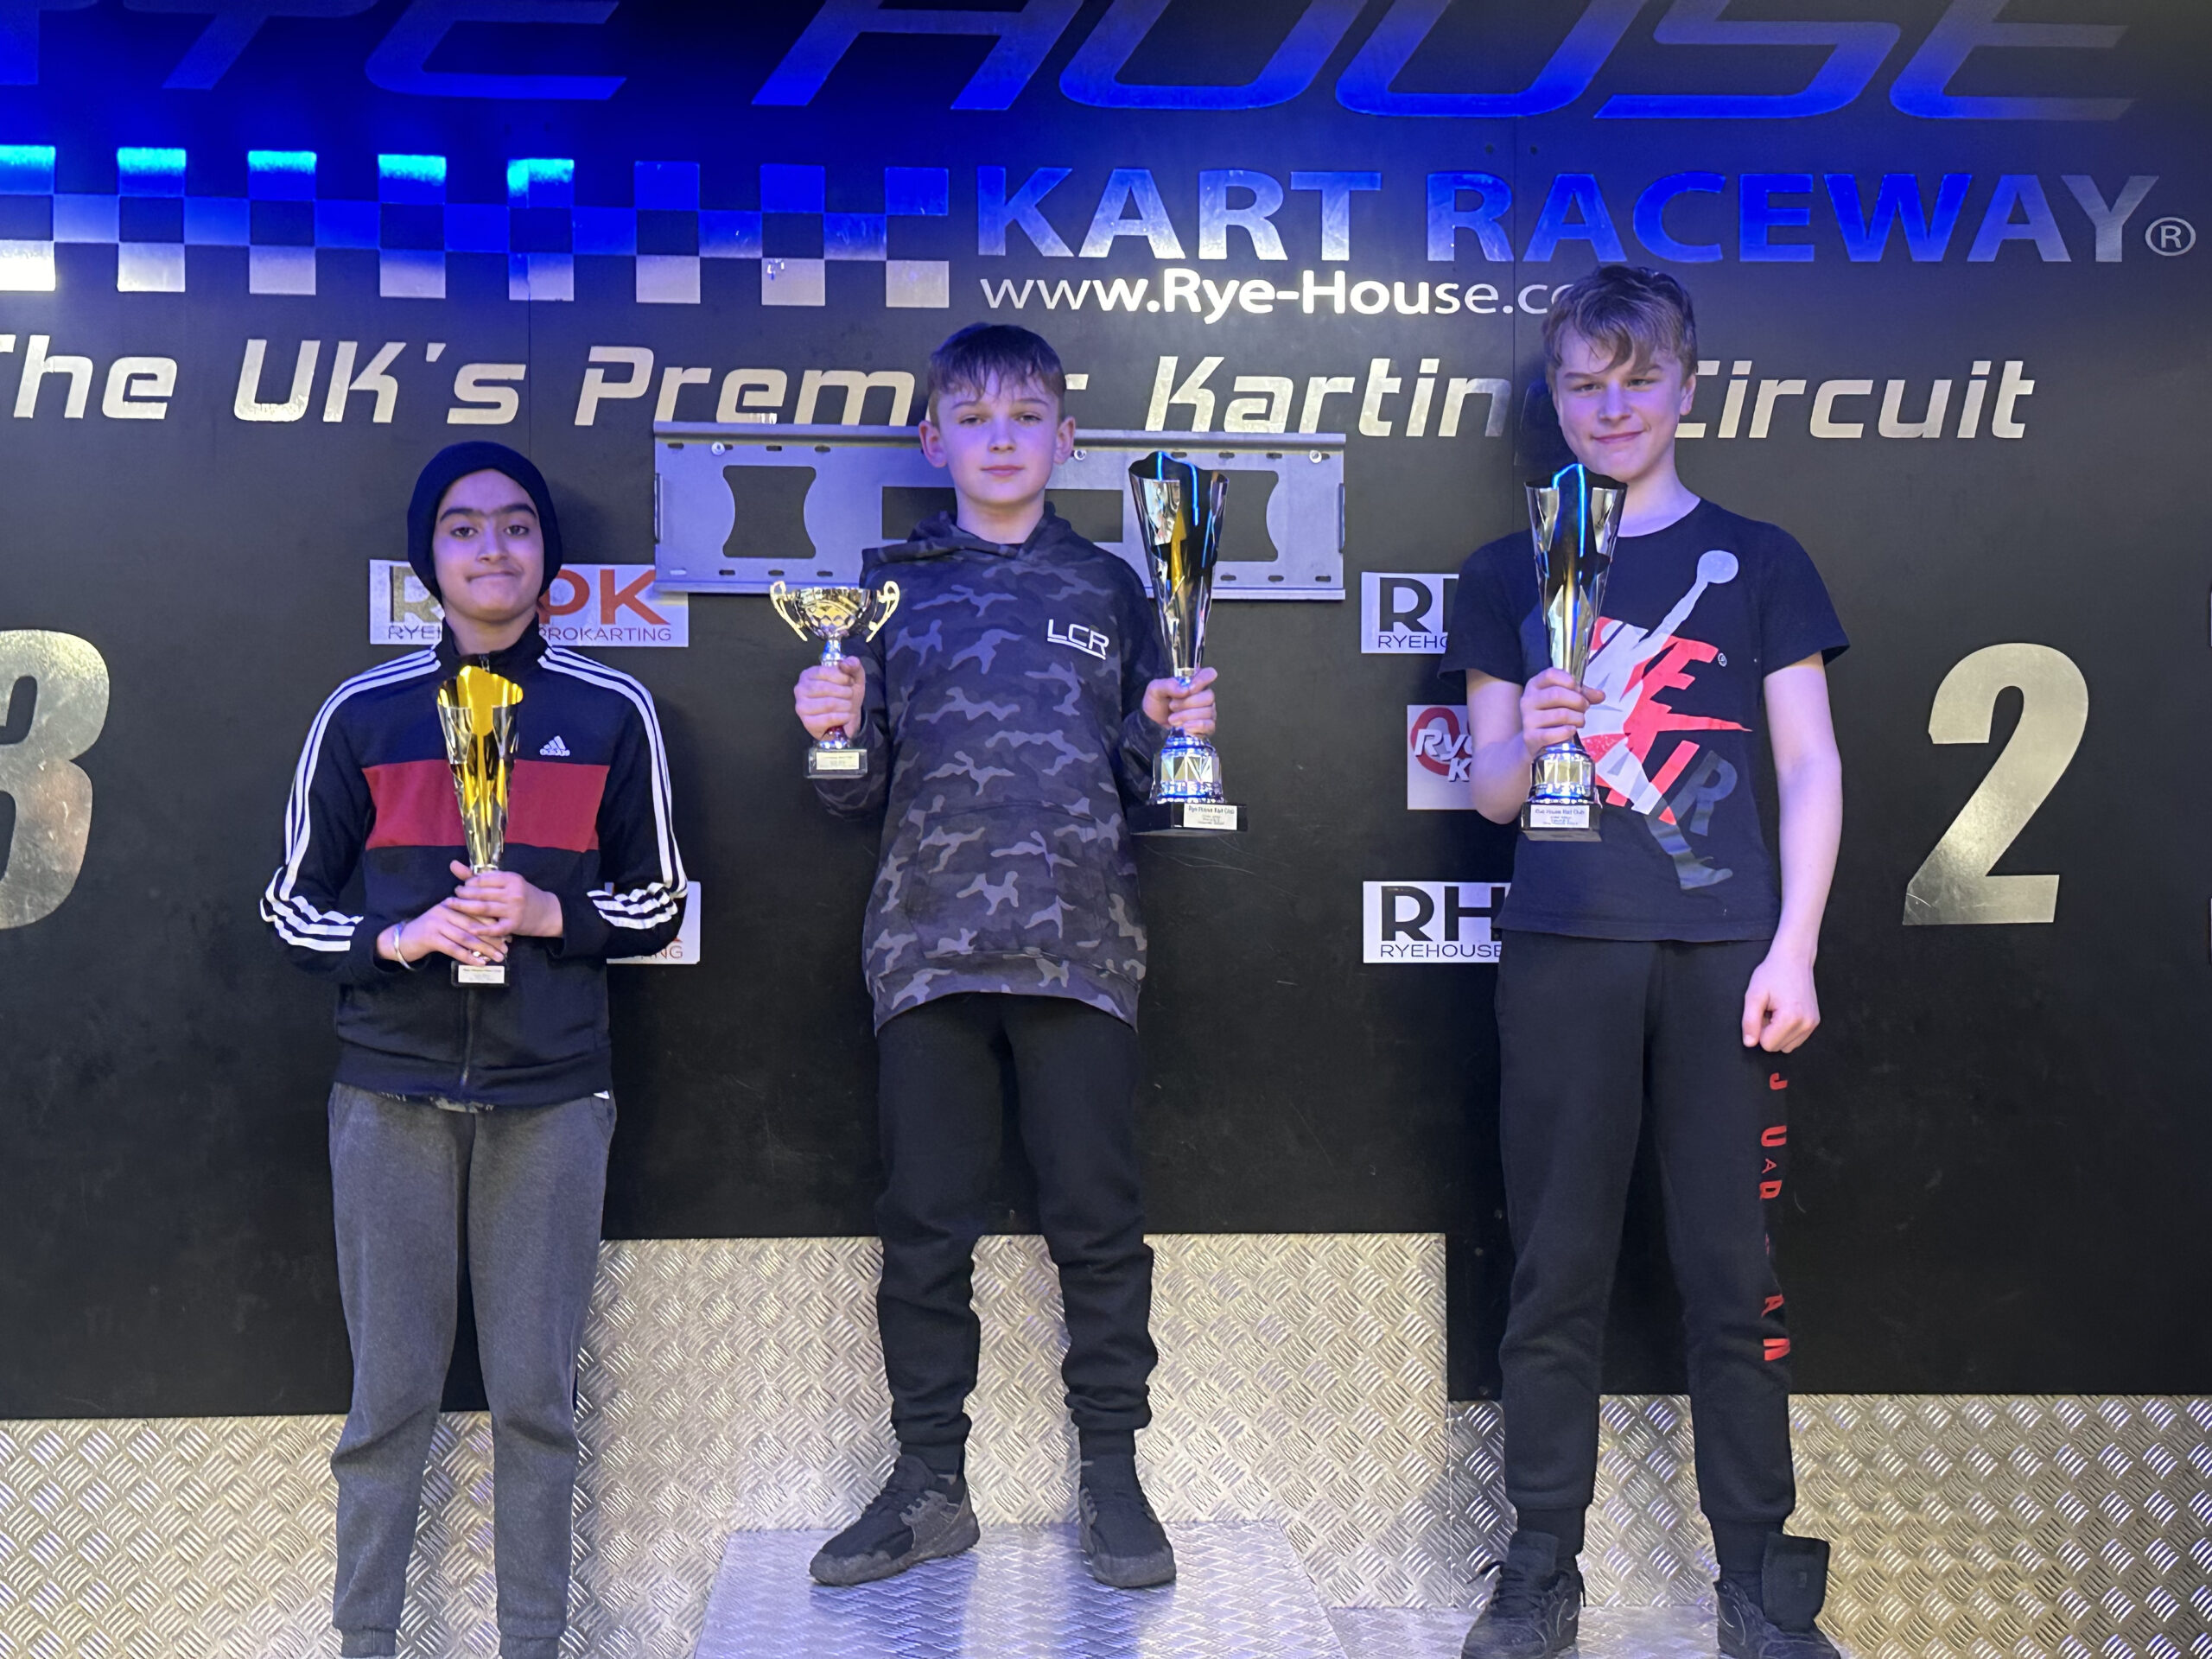 EBC-Equipped Wheatley Dominates at Rye House Kart Race